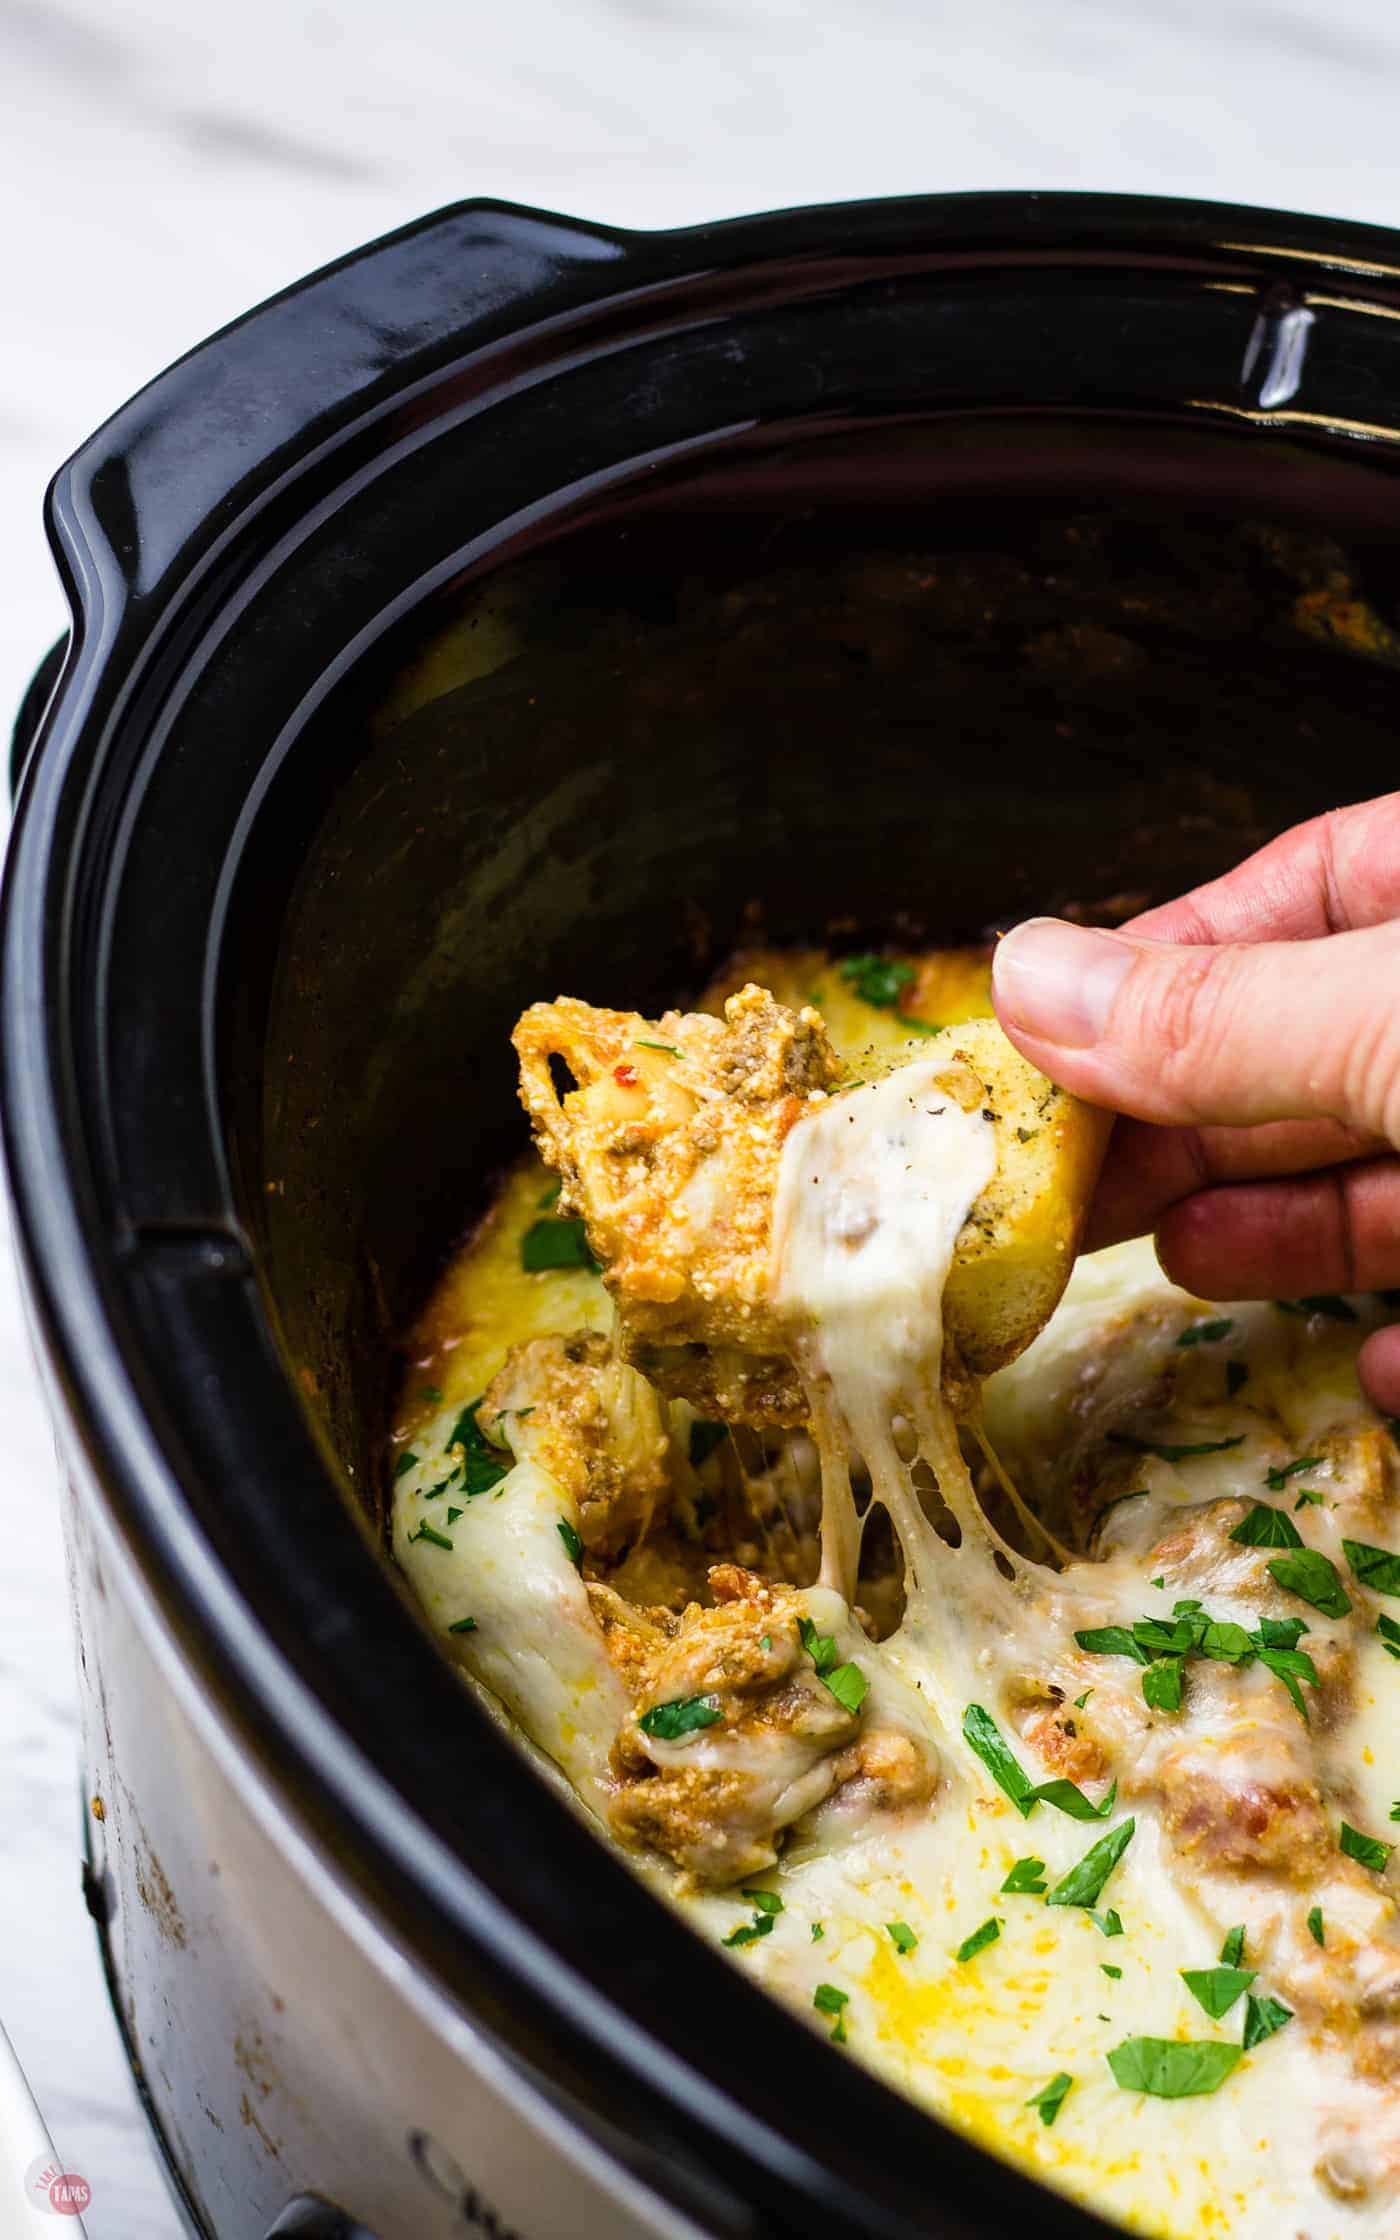 Dip your breadstick into my extra cheesy lasagna dip made in a crockpot! 